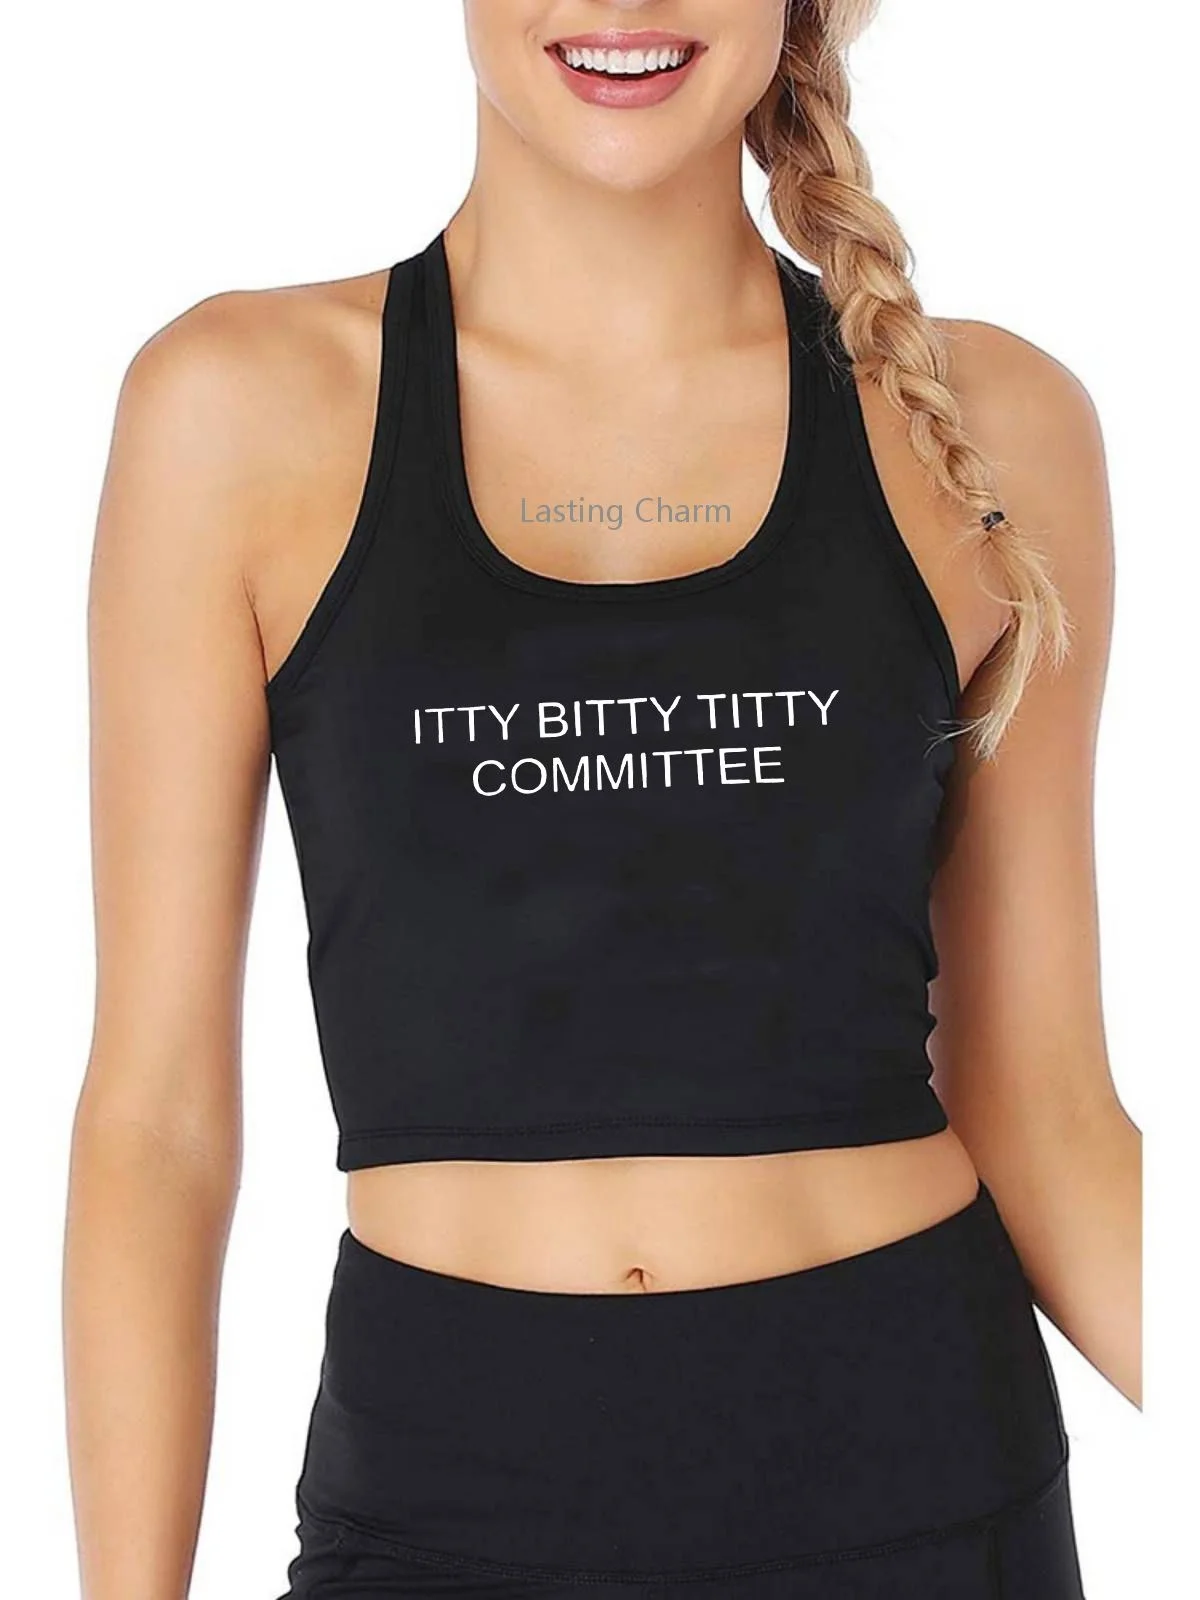 

Itty Bitty Titty Committee Pattern Crop Top Adult Personalization Fun Print Yoga Sports Workout Tank Tops Gym Vest